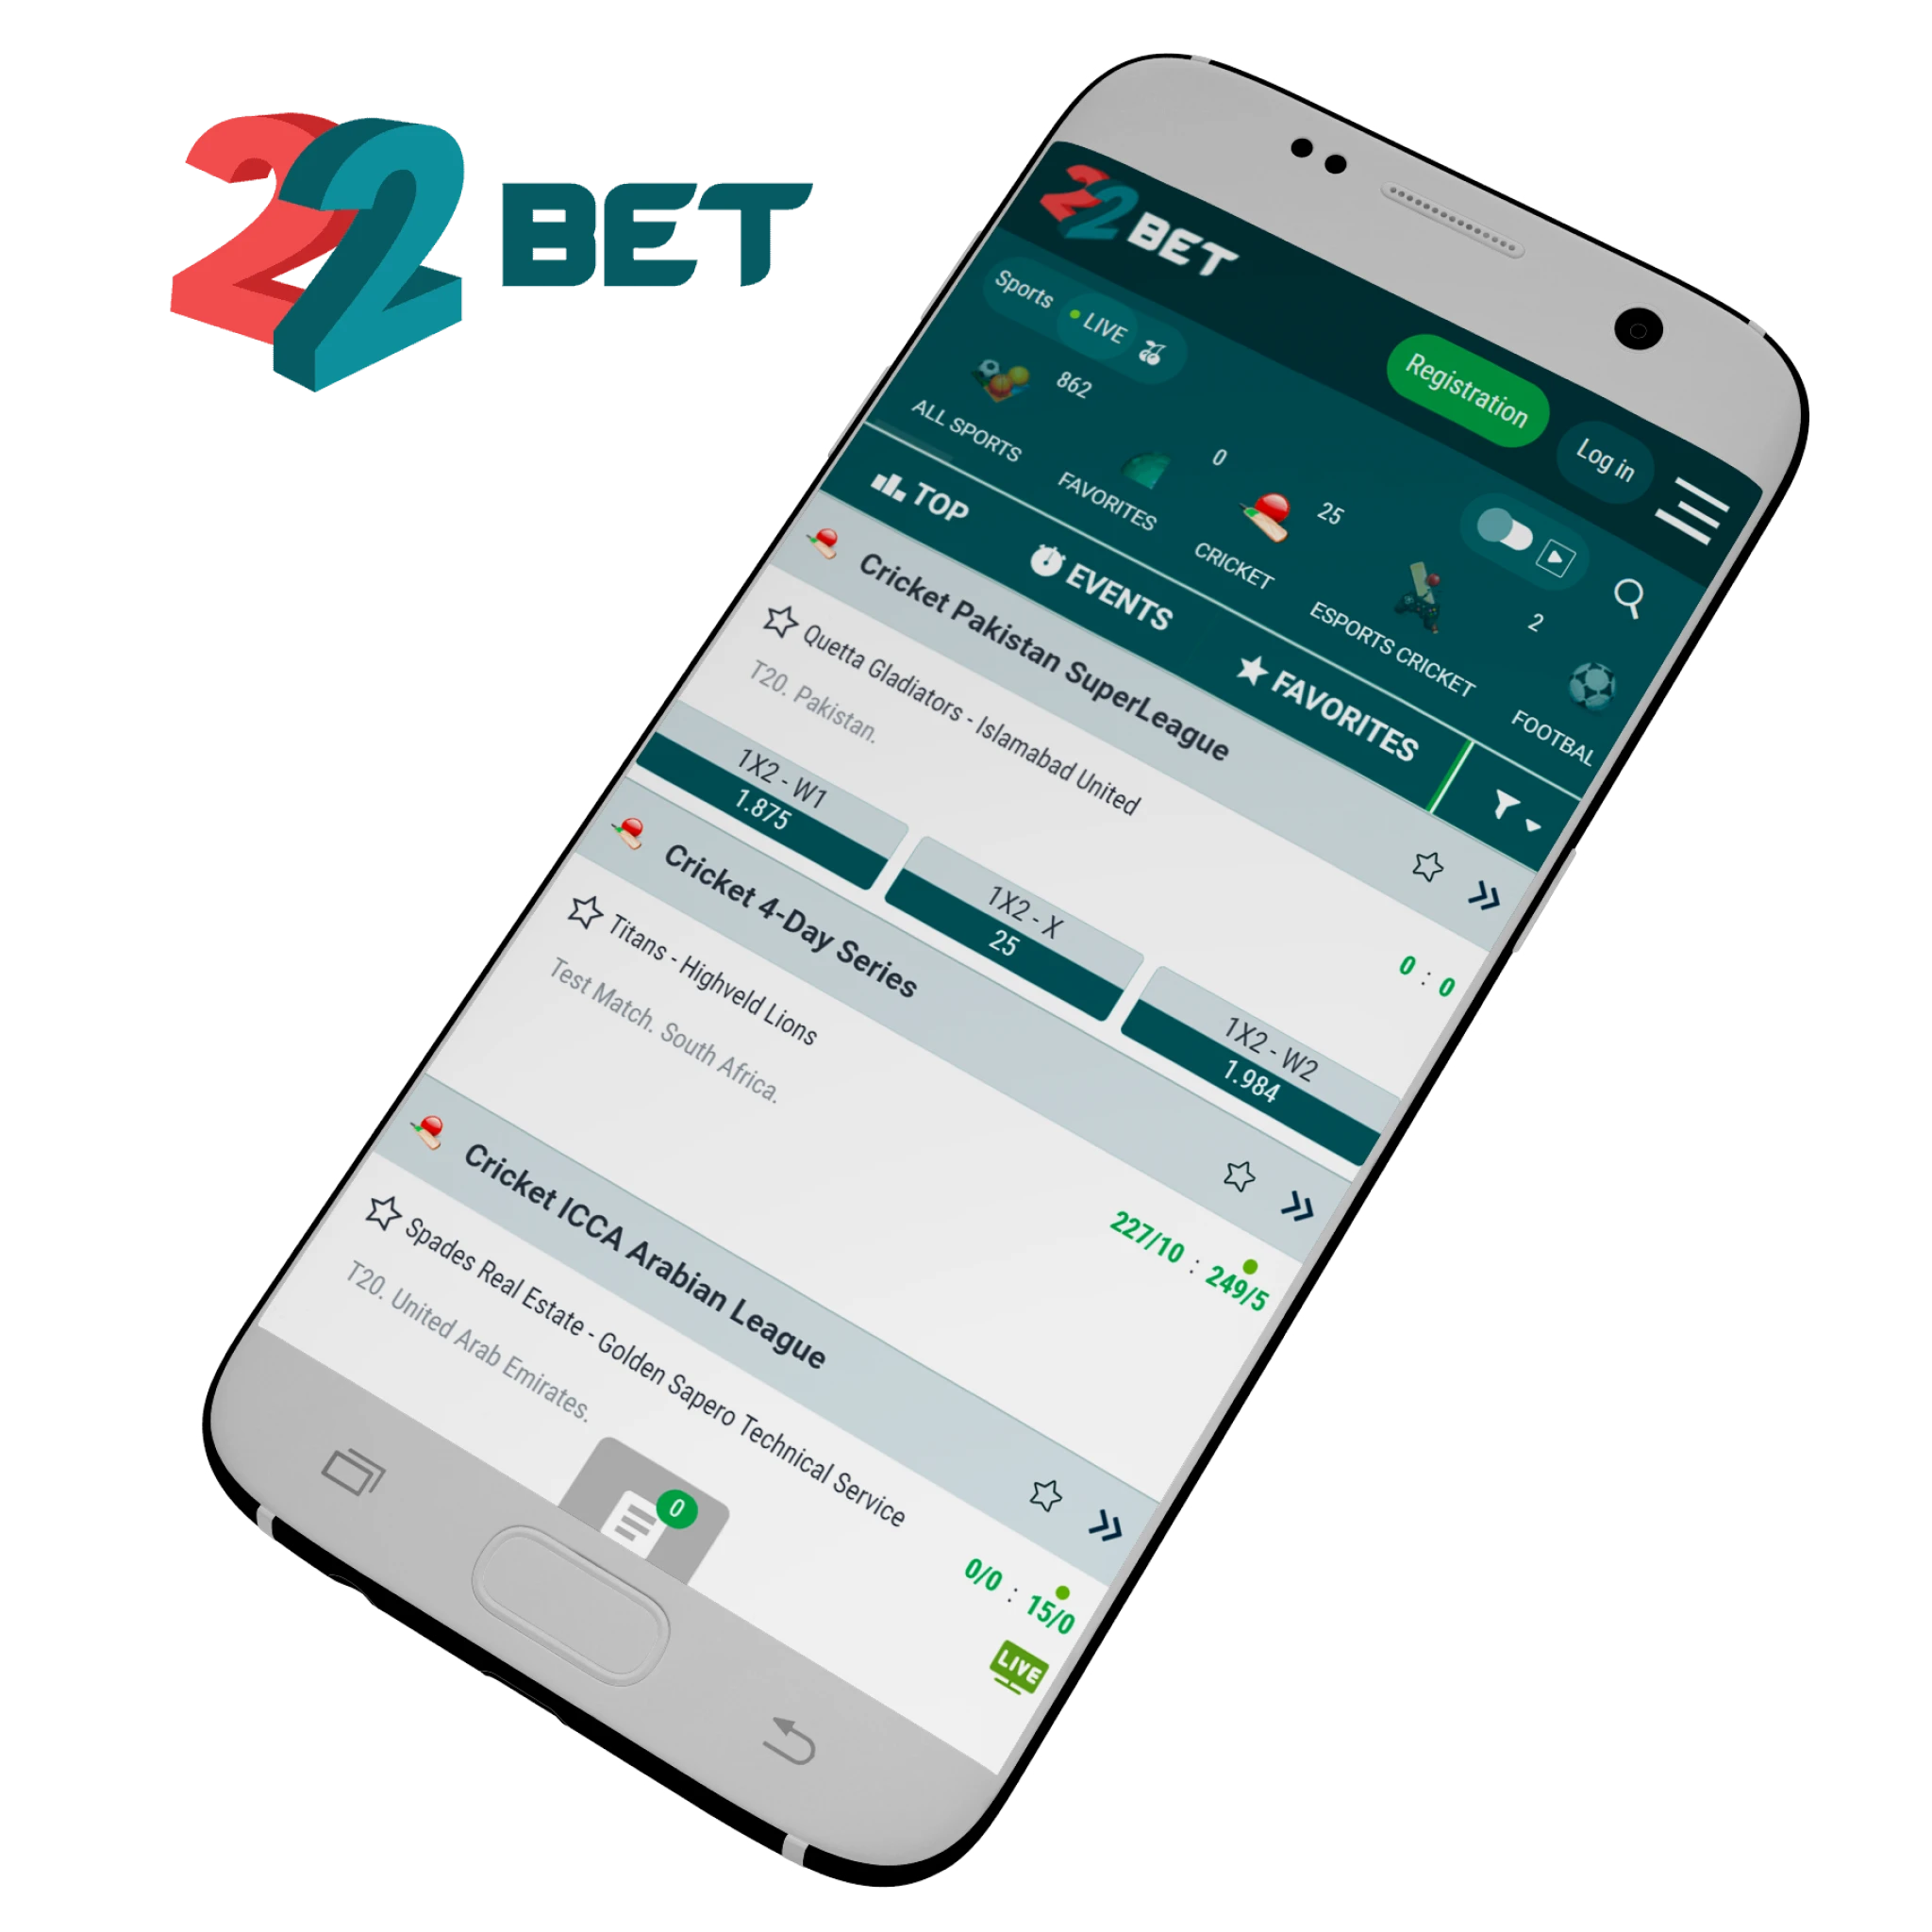 22bet app offers low system requirements for downloading and cricket betting.